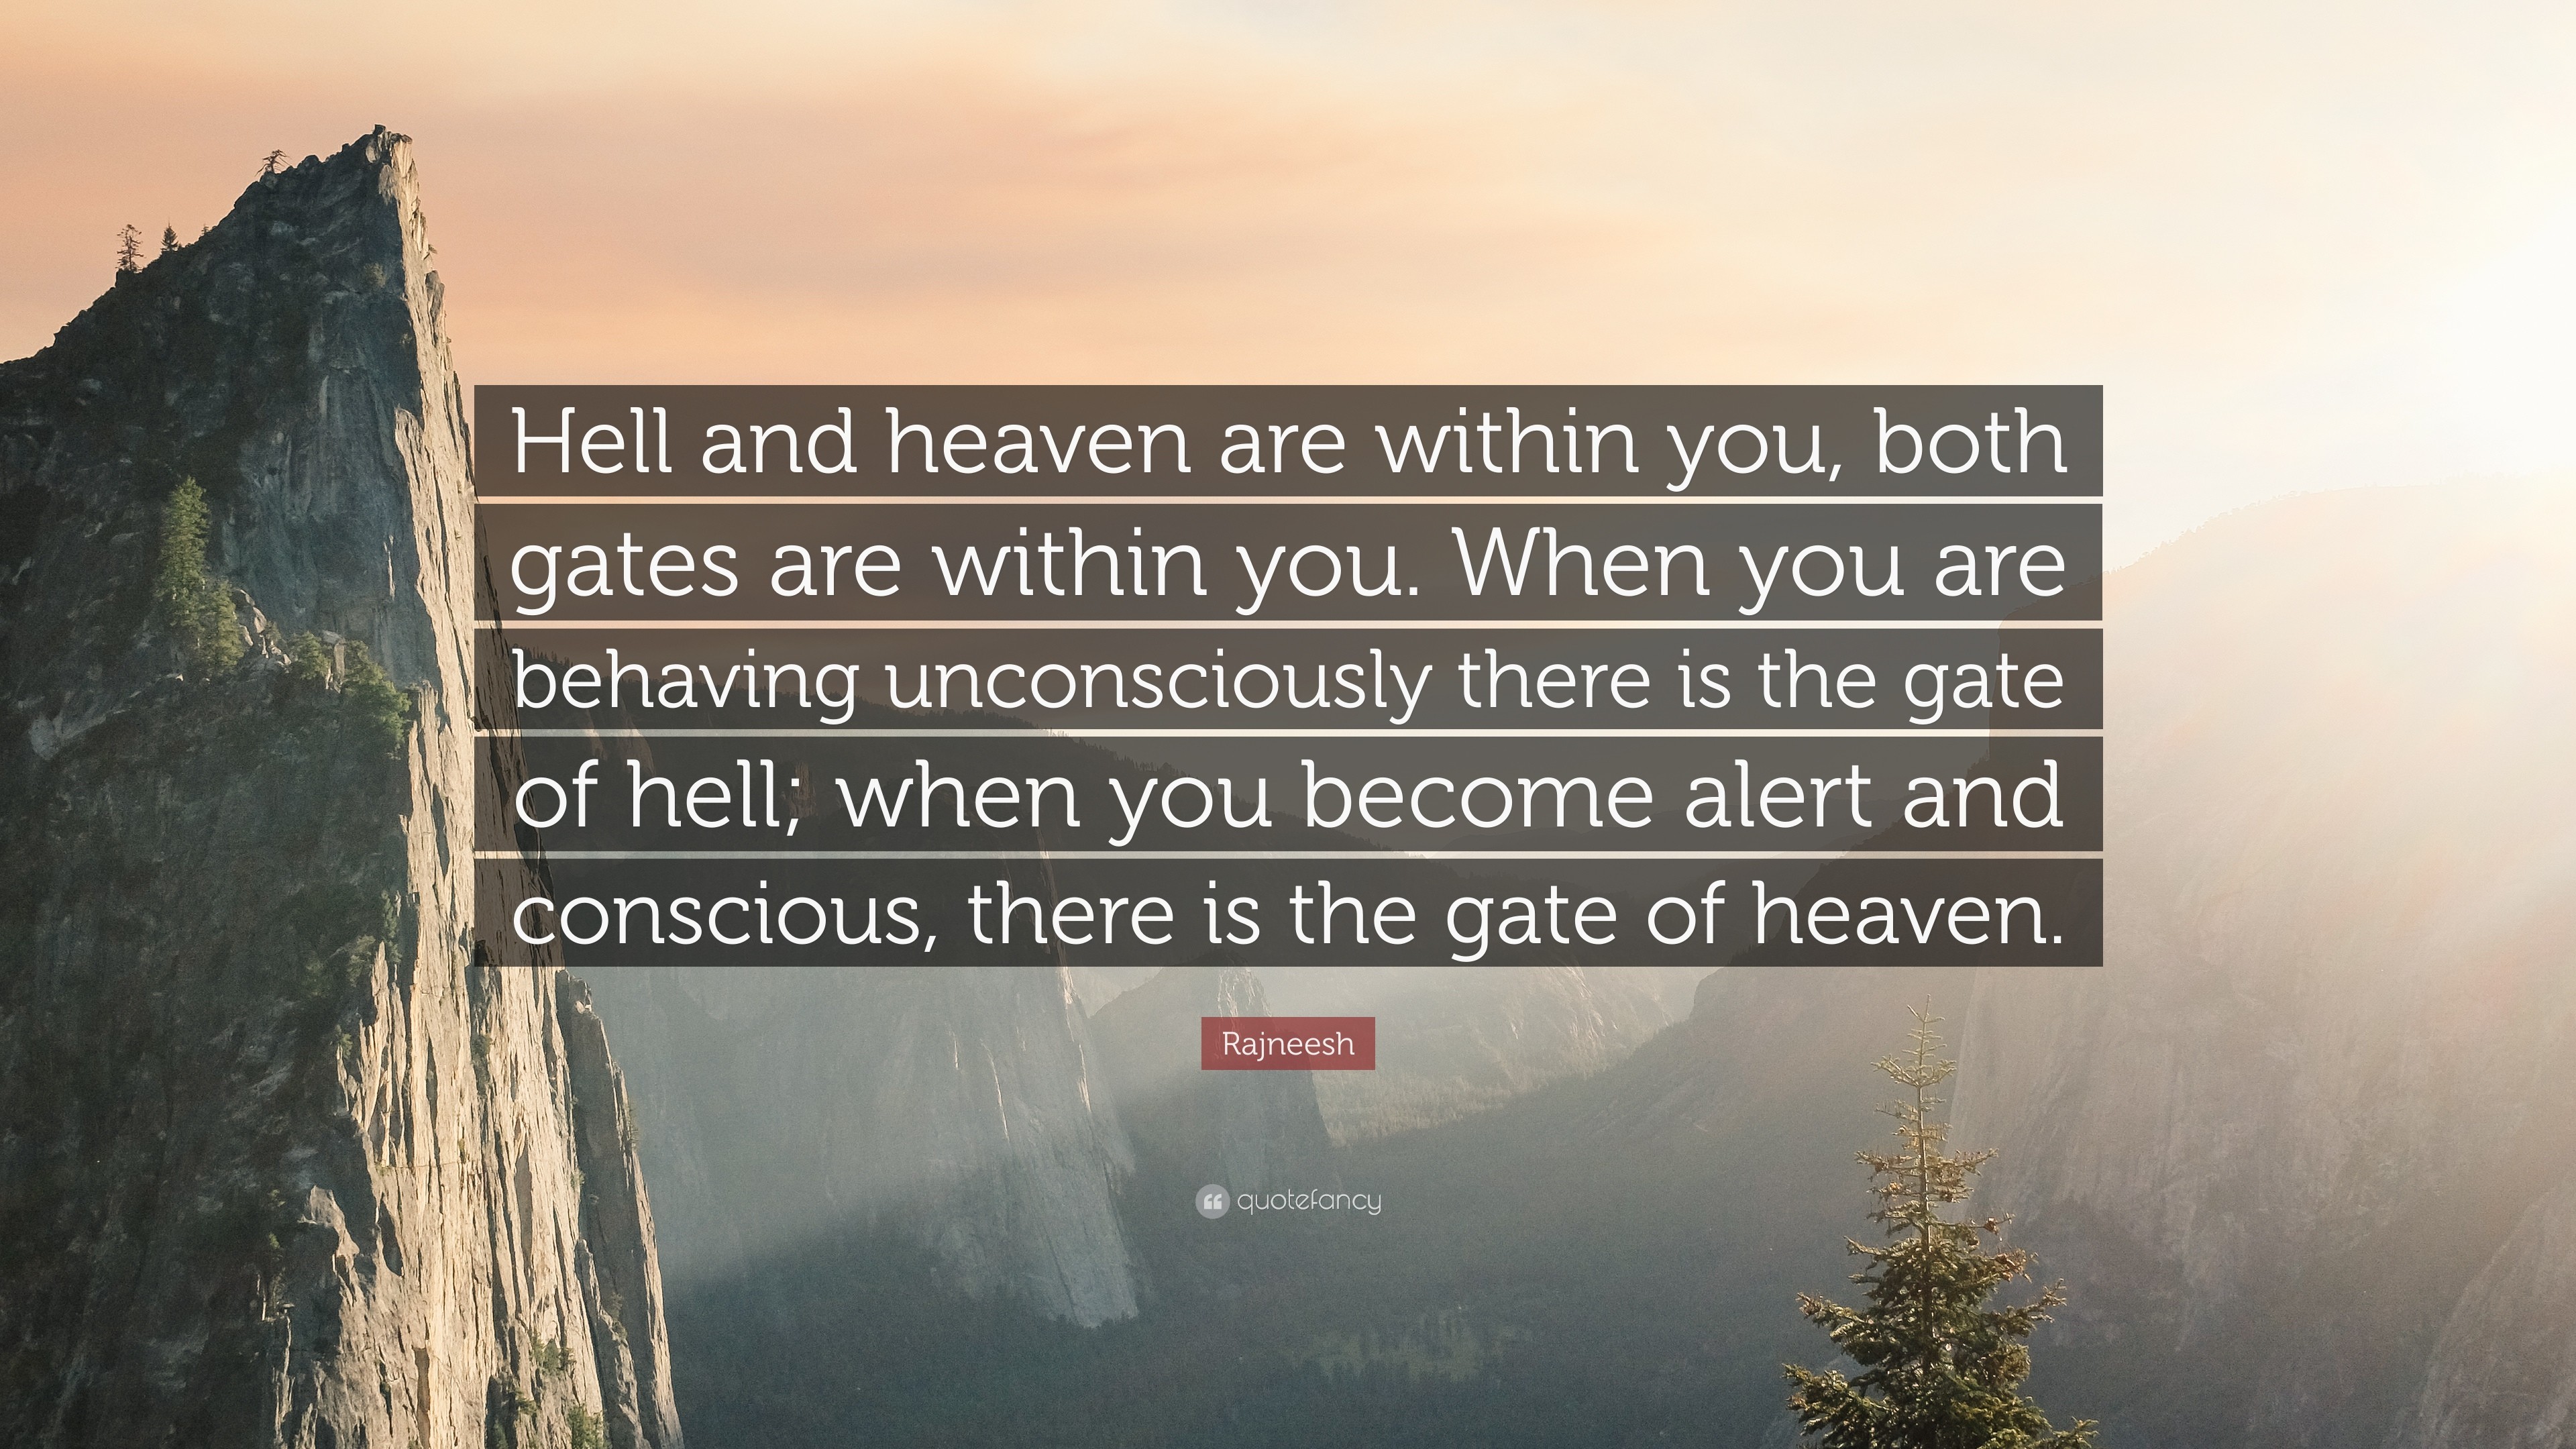 3840x2160 Rajneesh Quote: “Hell and heaven are within you, both gates are within you